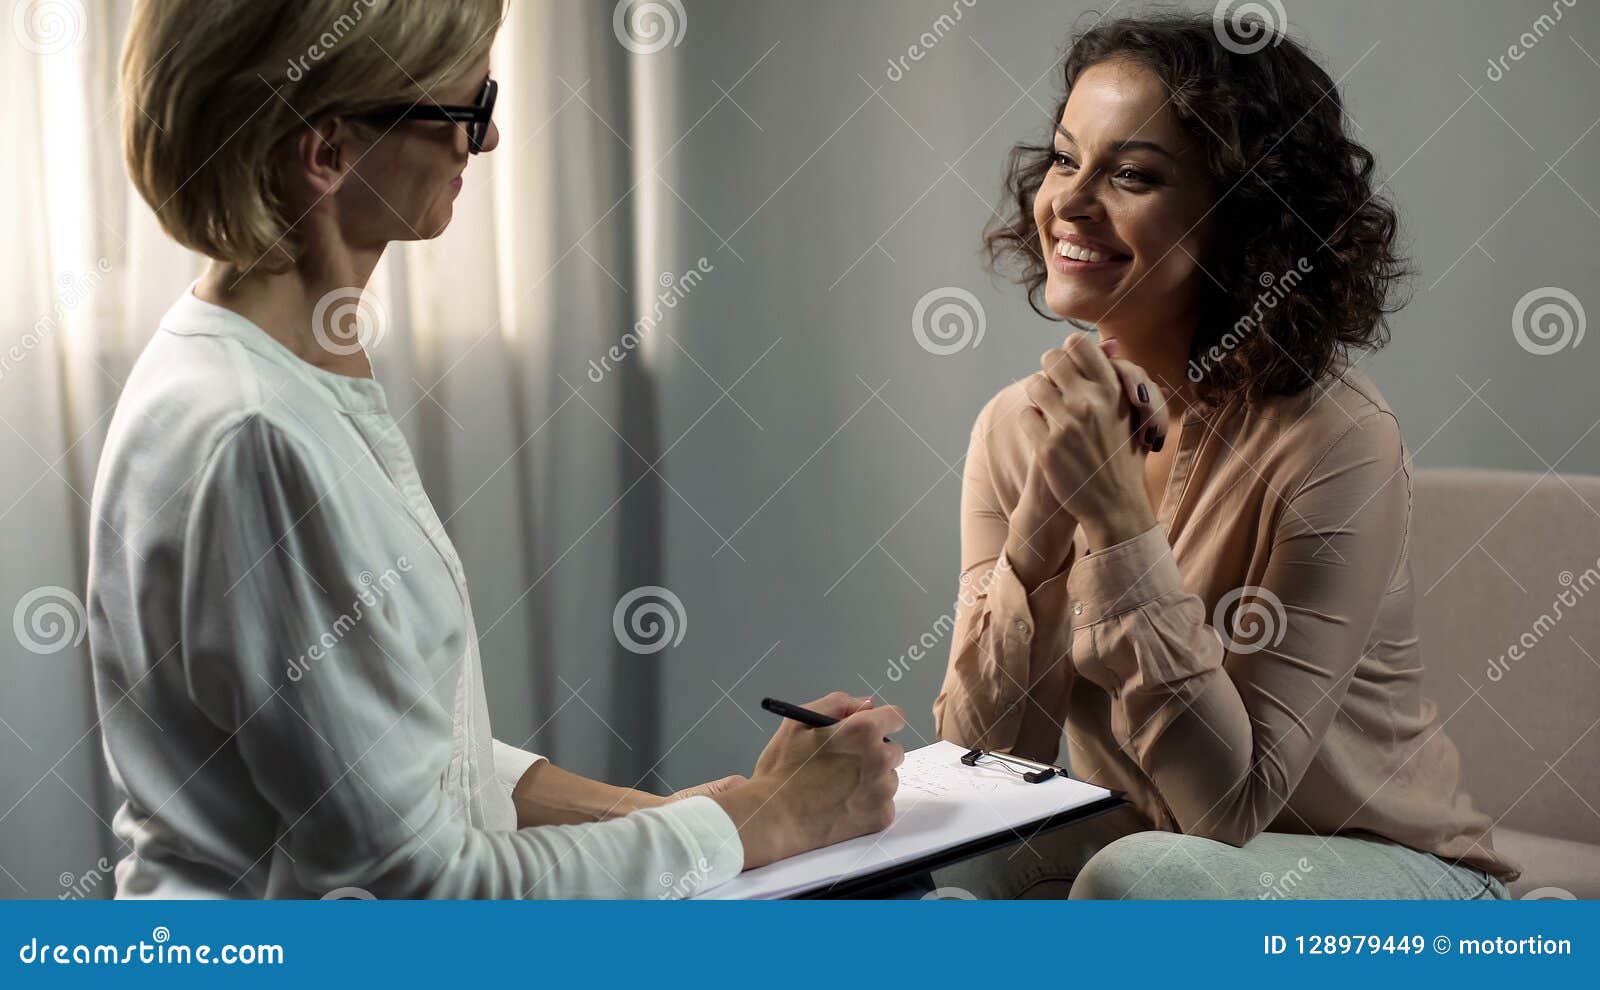 smiling lady patient thanking her psychologist after depression rehab, therapy